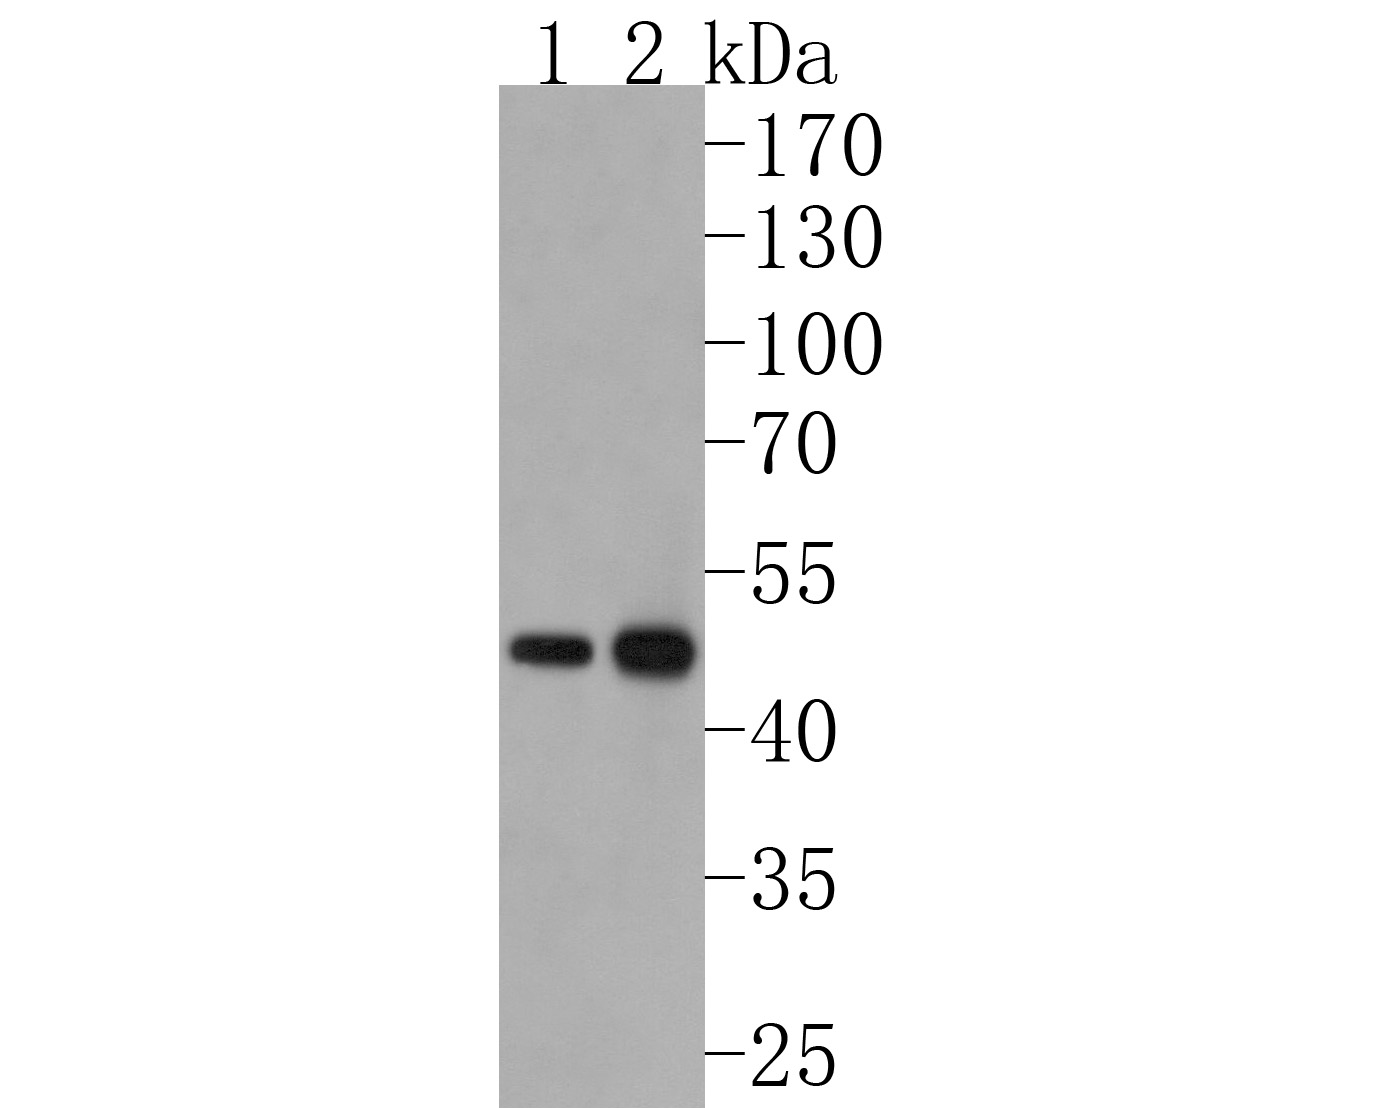 Western blot analysis of FDFT1 on different lysates. Proteins were transferred to a PVDF membrane and blocked with 5% NFDM/TBST for 1 hour at room temperature. The primary antibody (HA720048, 1/500) was used in 5% NFDM/TBST at room temperature for 2 hours. Goat Anti-Rabbit IgG - HRP Secondary Antibody (HA1001) at 1:200,000 dilution was used for 1 hour at room temperature.<br />
Positive control: <br />
Lane 1: HepG2 cell lysate<br />
Lane 2: Rat kidney tissue lysate